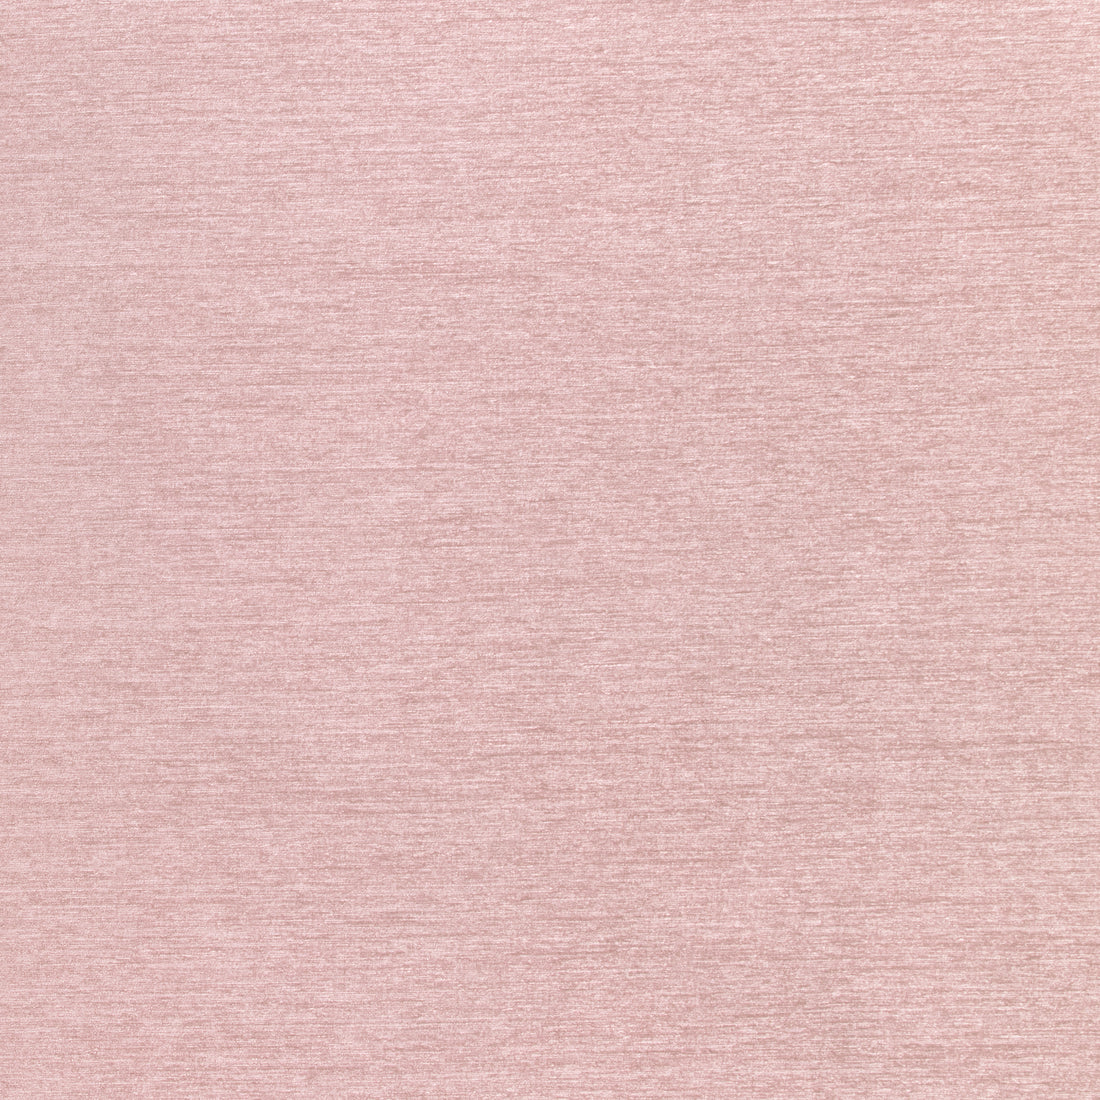 Annalise fabric in rose color - pattern number W80469 - by Thibaut in the Mosaic collection